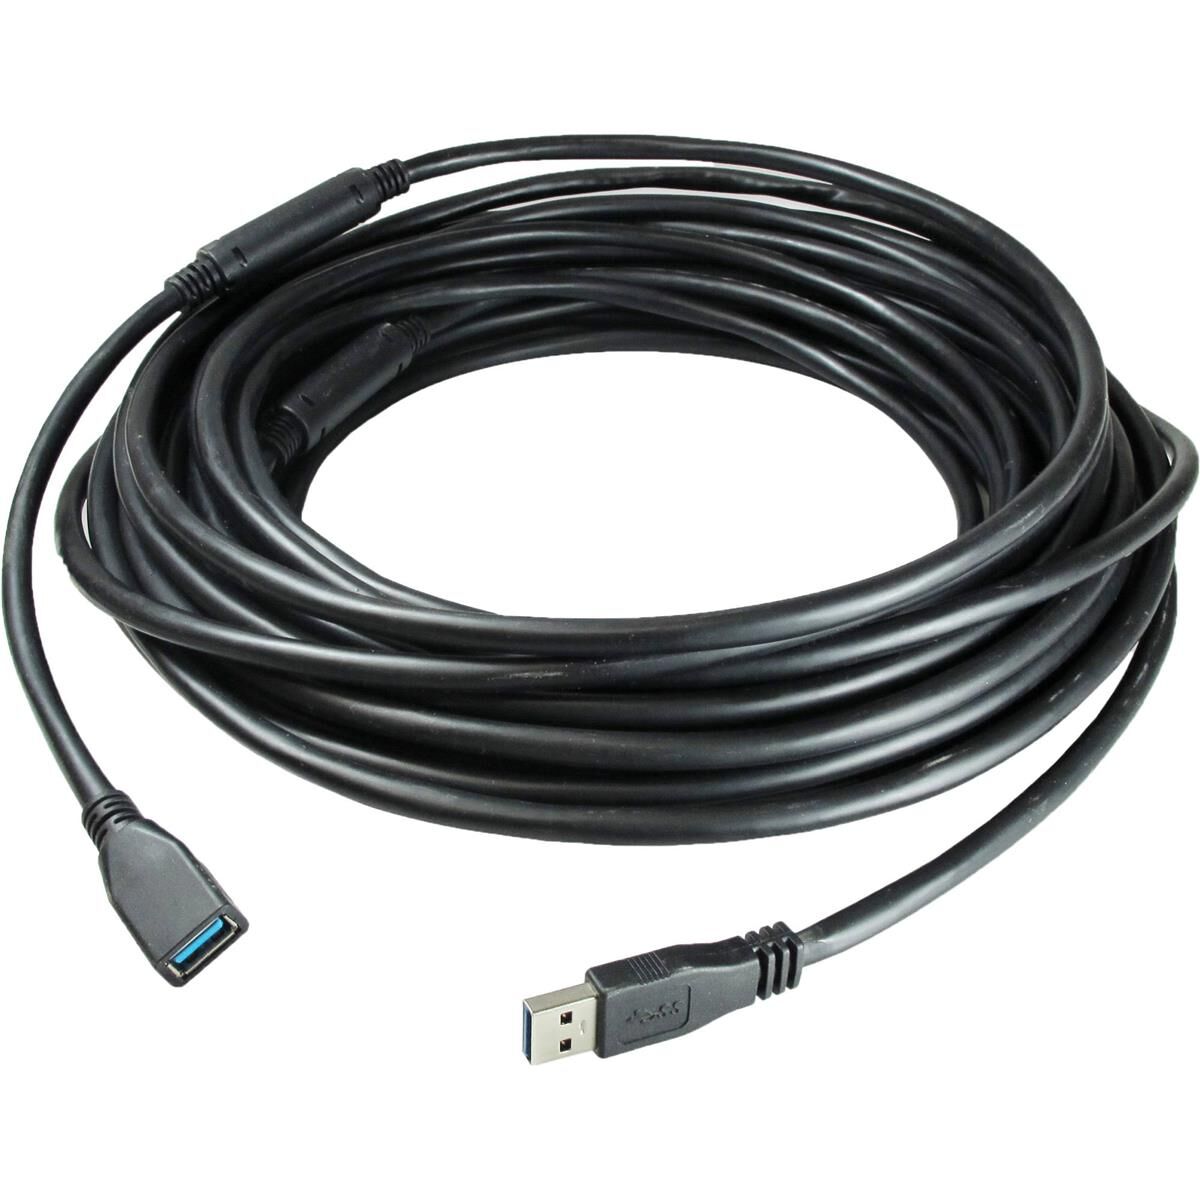 Comprehensive Pro AV/IT Active USB 3.0 Type-A Male to Female Cable, 25'